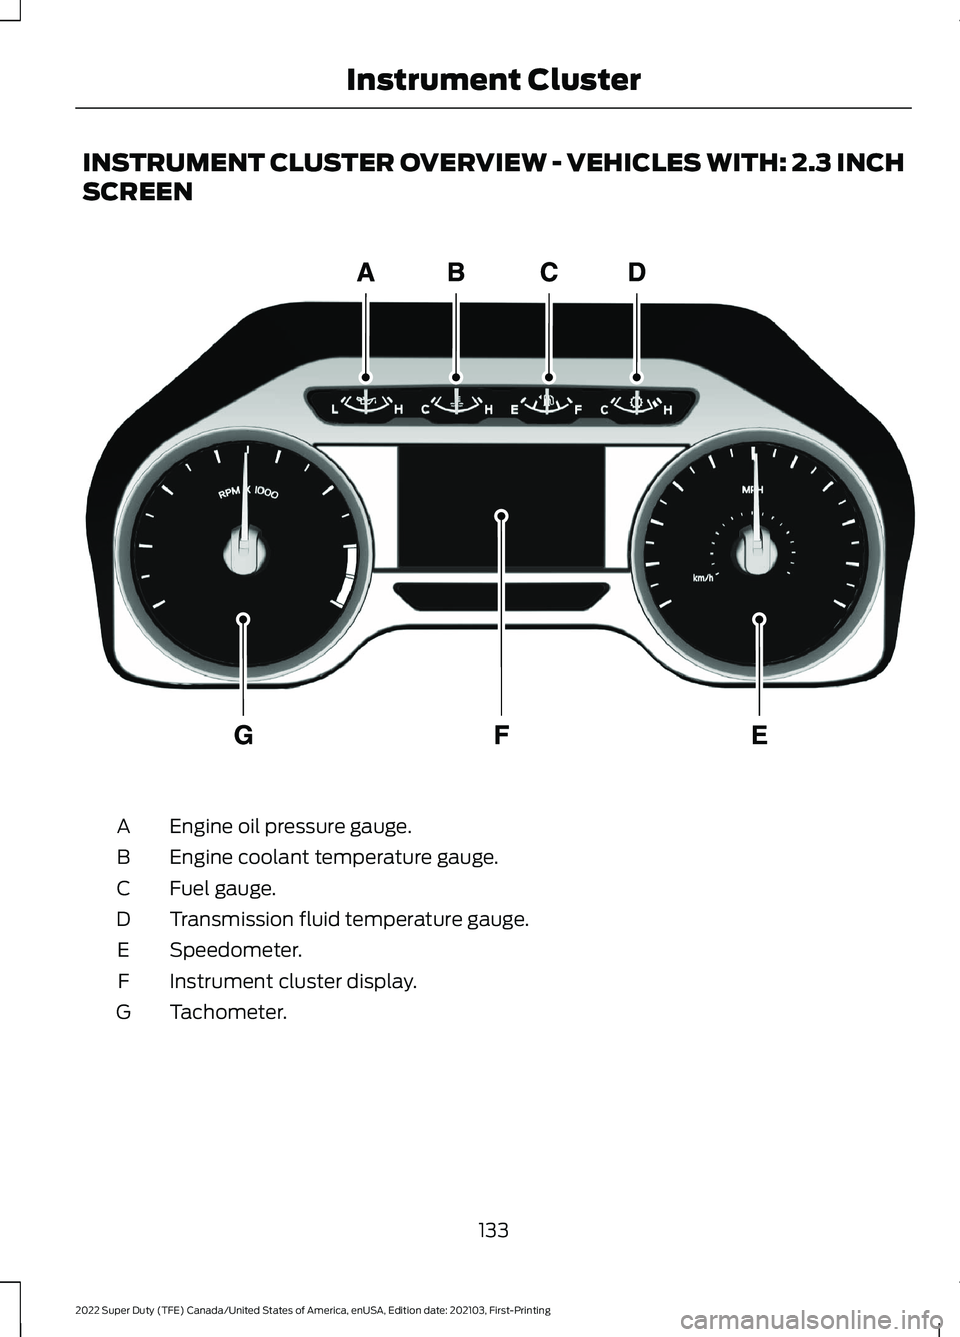 FORD F-250 2022  Owners Manual INSTRUMENT CLUSTER OVERVIEW - VEHICLES WITH: 2.3 INCH
SCREEN
Engine oil pressure gauge.
A
Engine coolant temperature gauge.
B
Fuel gauge.
C
Transmission fluid temperature gauge.
D
Speedometer.
E
Instr